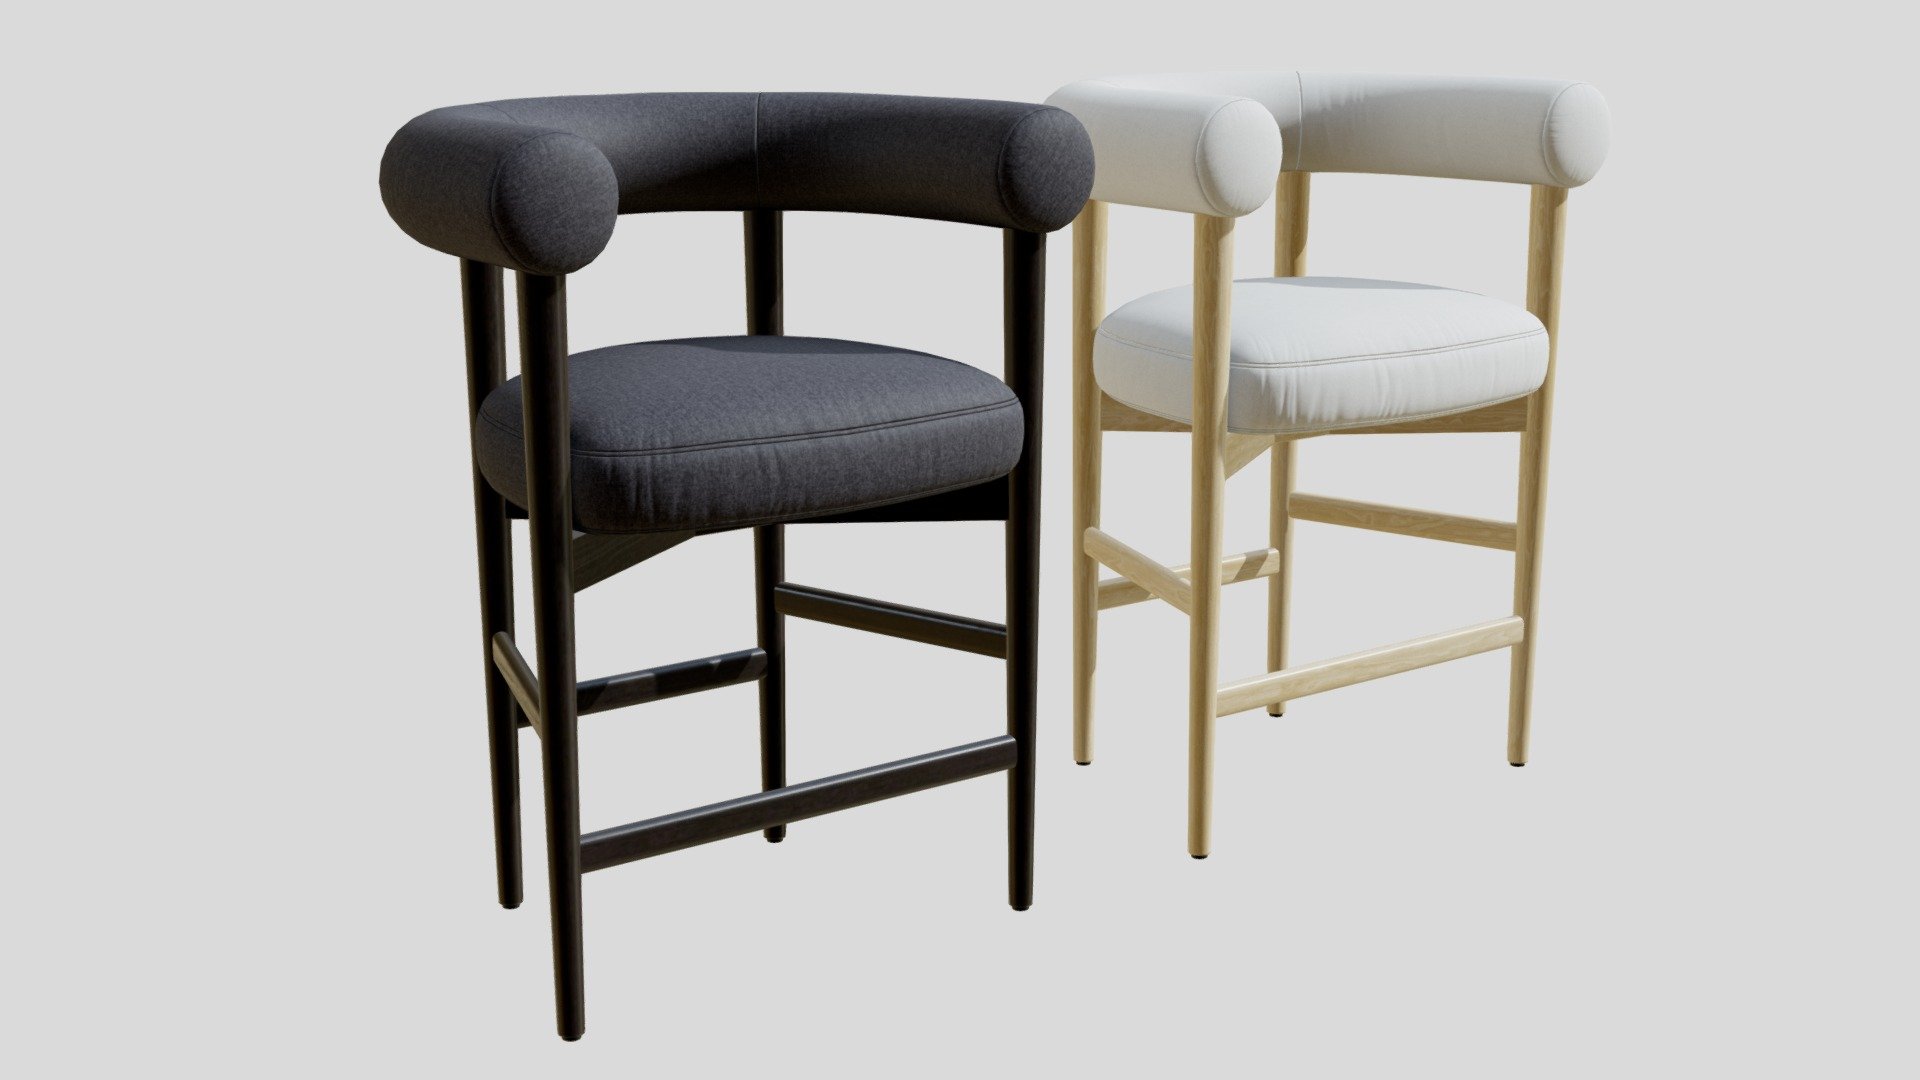 High-quality 3d model of a Crate and Barrel Mazz Curved Counter Stool by Leanne Ford.
2 colors

Original: https://www.crateandbarrel.com/mazz-charcoal-curved-counter-stool-by-leanne-ford/s434472

One stool contains: 
3986 polygons
4172 vertices - Crate&Barrel Mazz Counter Stool - Buy Royalty Free 3D model by 3detto 3d model